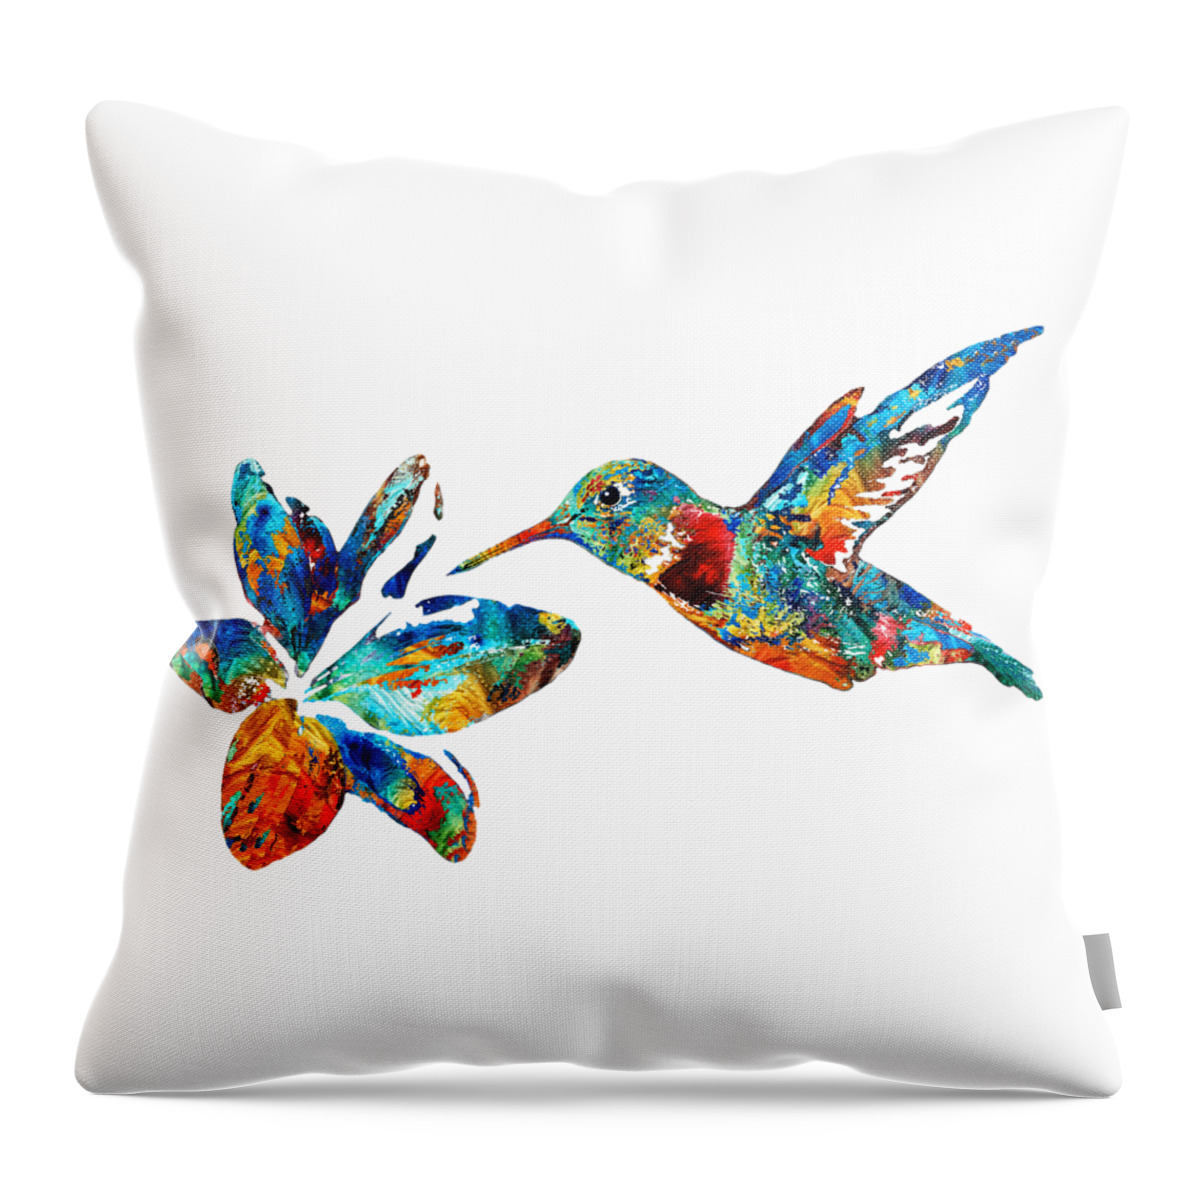 Hummingbird Throw Pillow featuring the painting Colorful Hummingbird Art by Sharon Cummings by Sharon Cummings